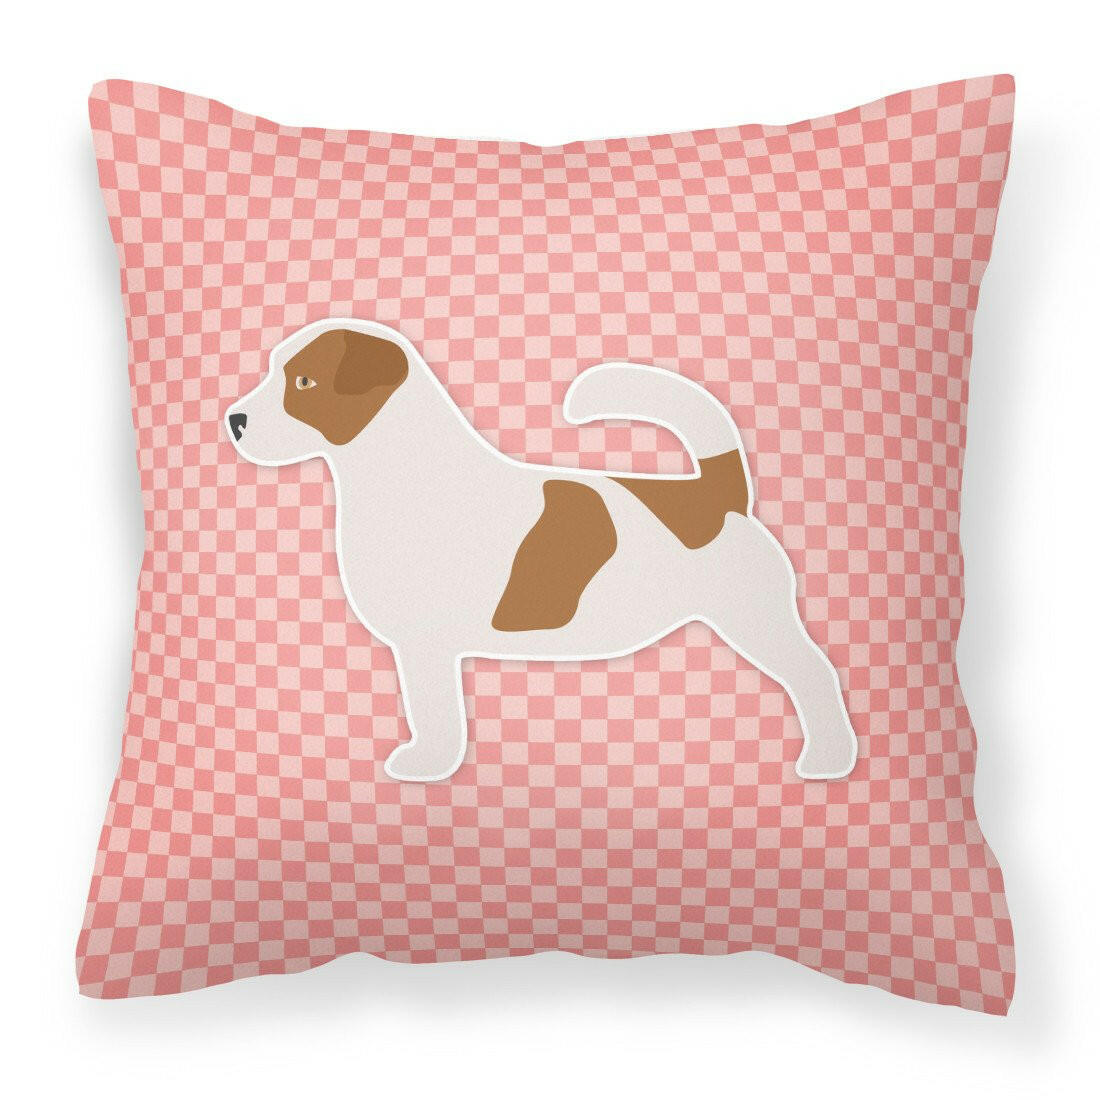 Jack Russell Terrier Checkerboard Pink Fabric Decorative Pillow BB3607PW1818 by Caroline's Treasures